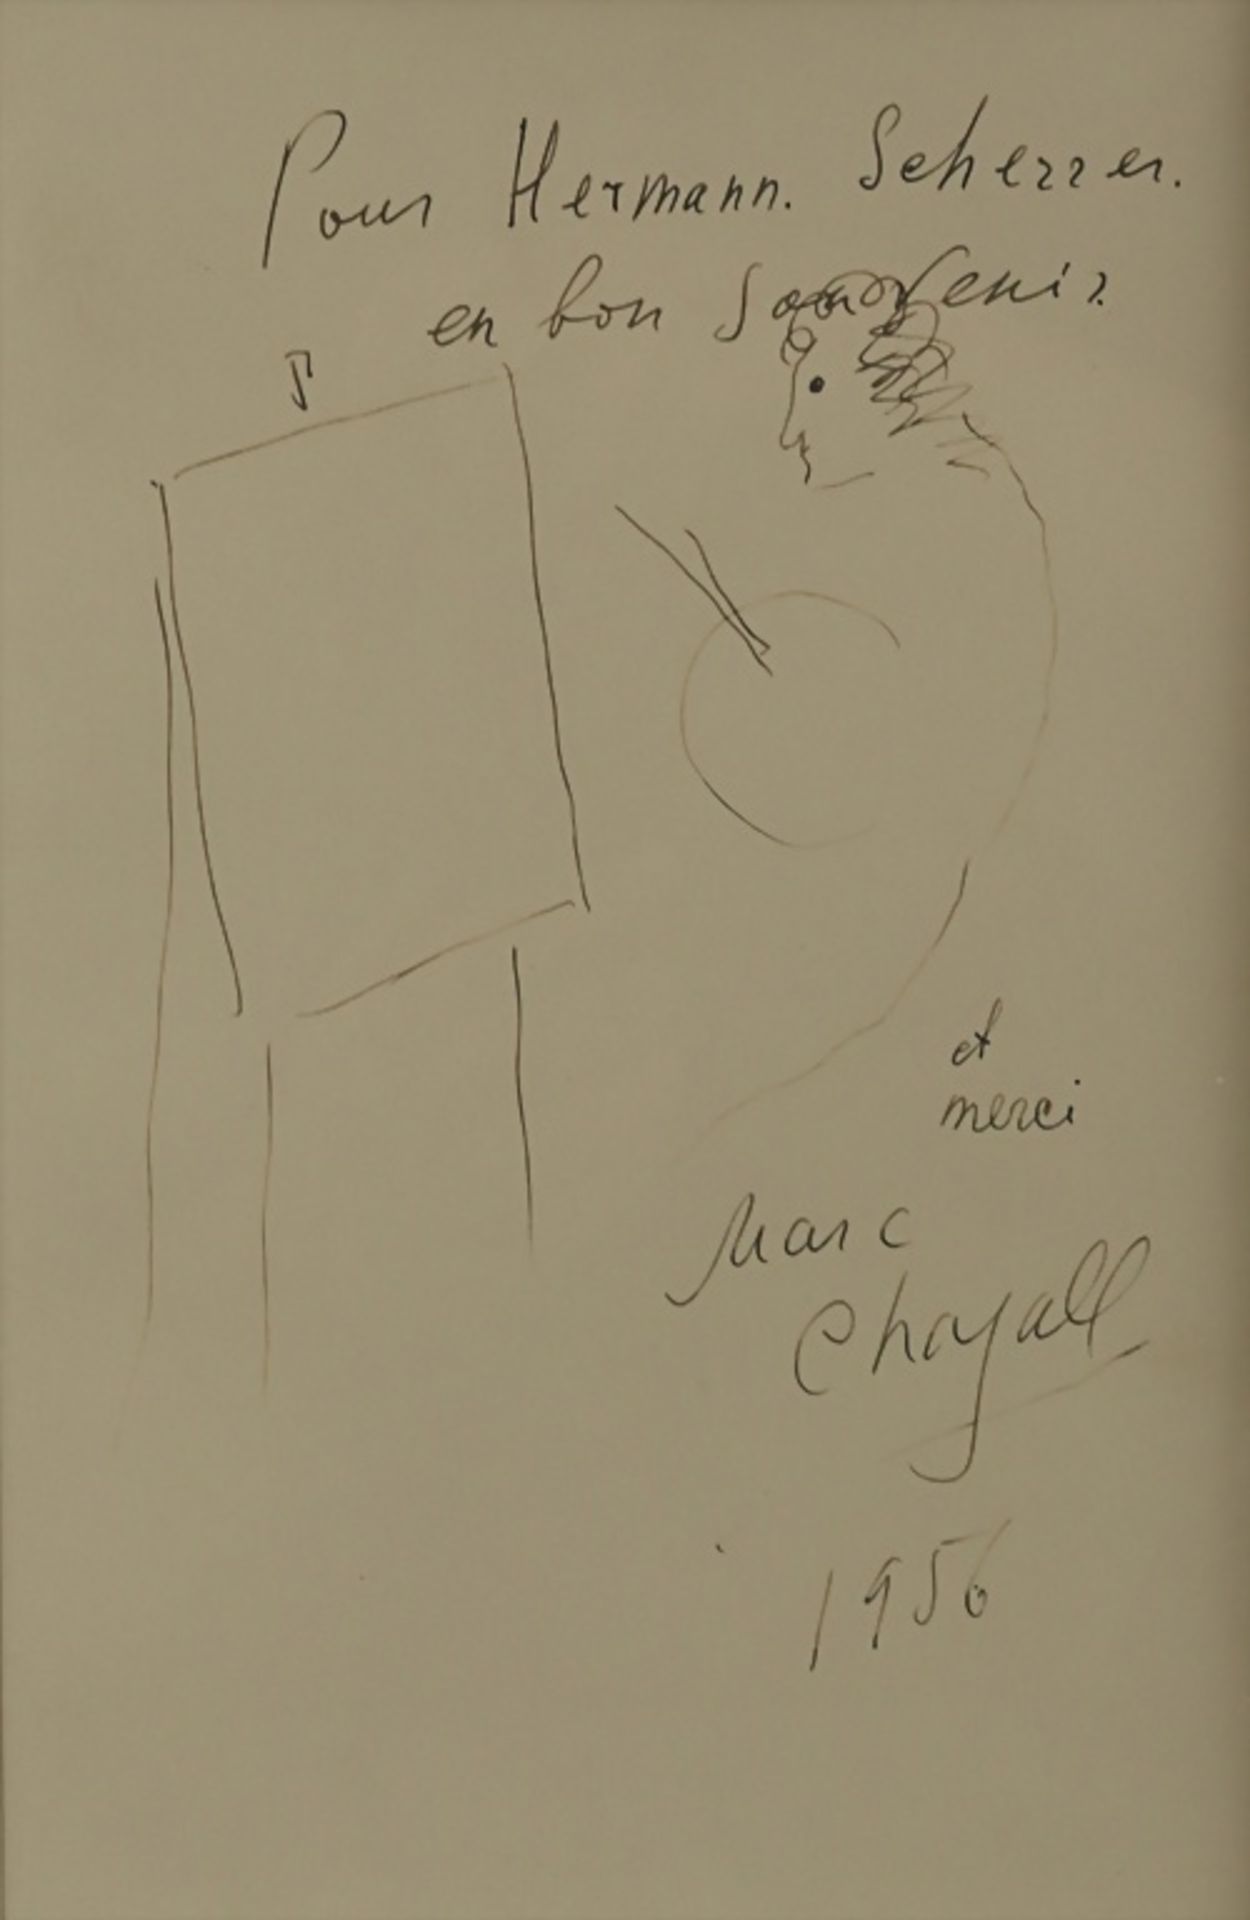 Marc Chagall (1887-1985), 'Devant le chevalet' / 'In front of the easel', 1956 - Image 2 of 5